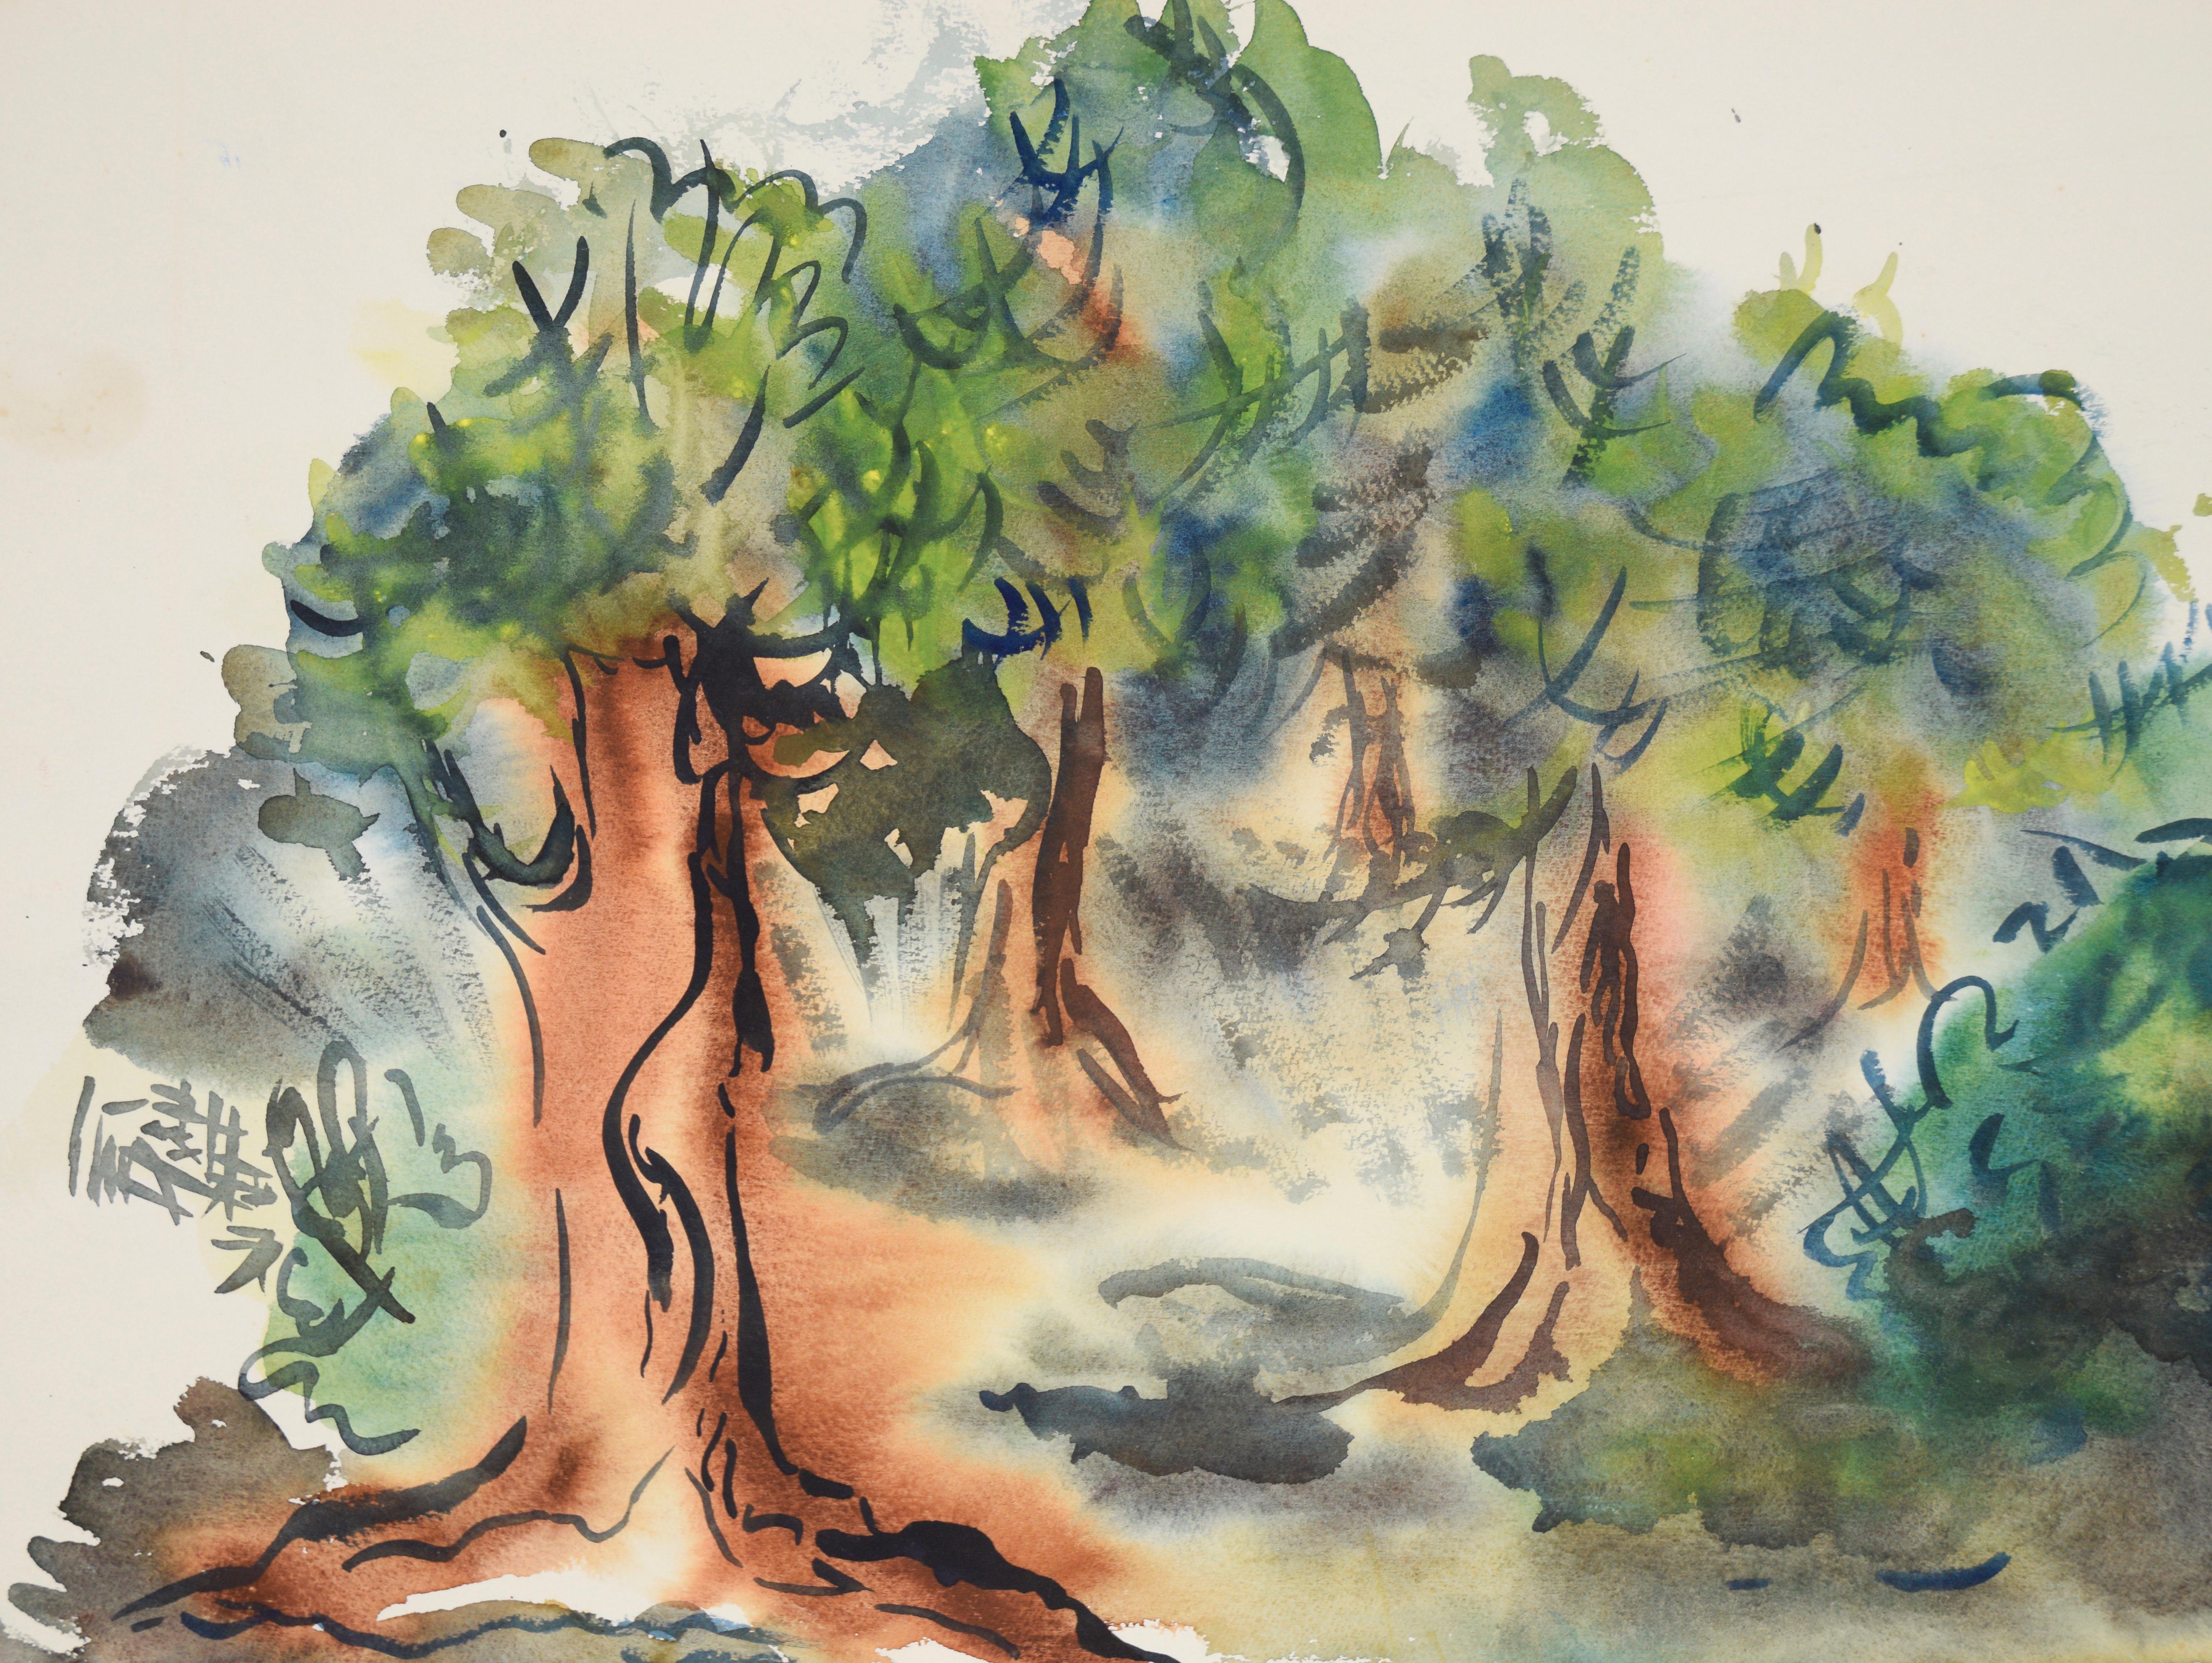 Through The Trees - Original Watercolor on Paper

Original watercolor painting depicting a grove of vibrant green trees by Bertram Spencer (American, 1918-1992). 

Presented in a light green mat.
Mat: 24